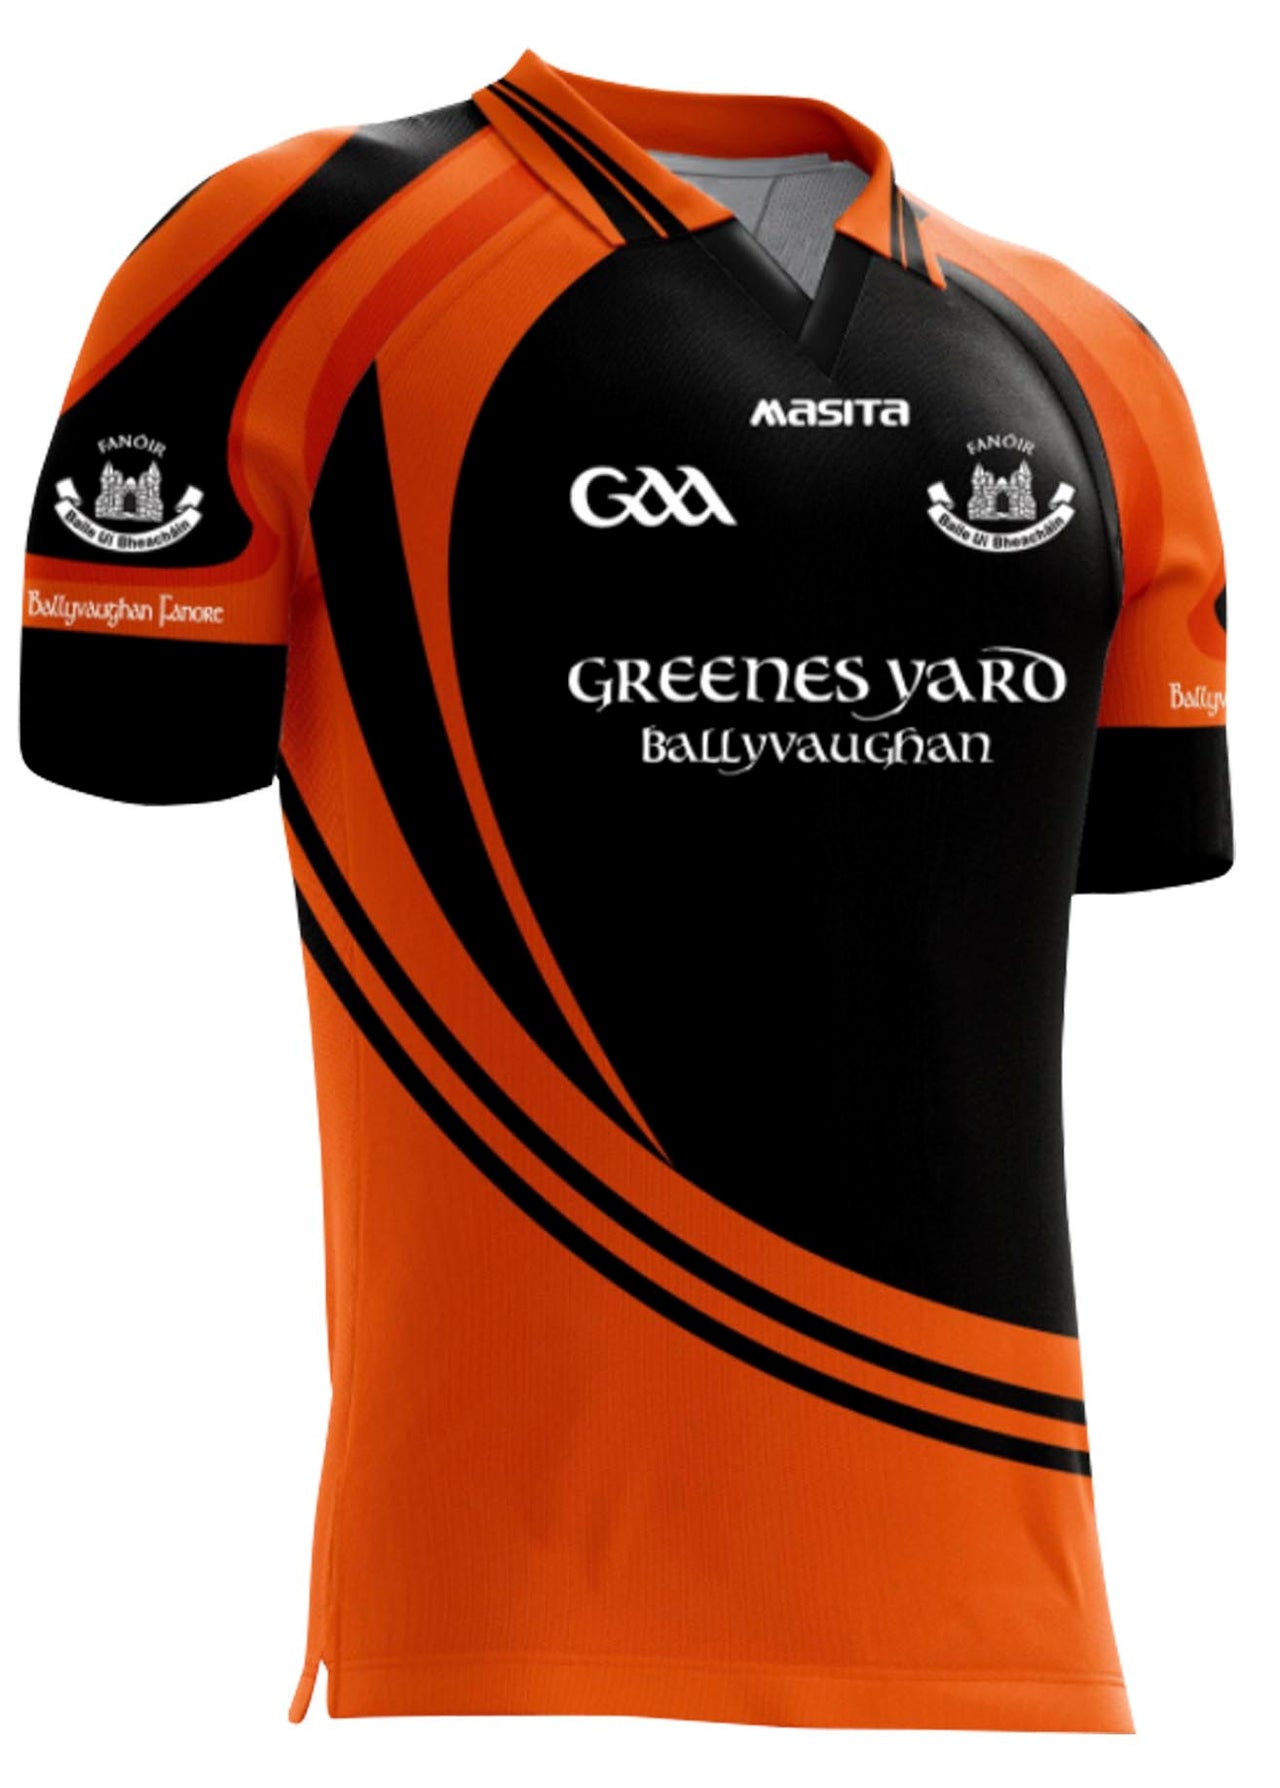 Ballyvaughan Fanore Goalkeeper Jersey Player Fit Adult